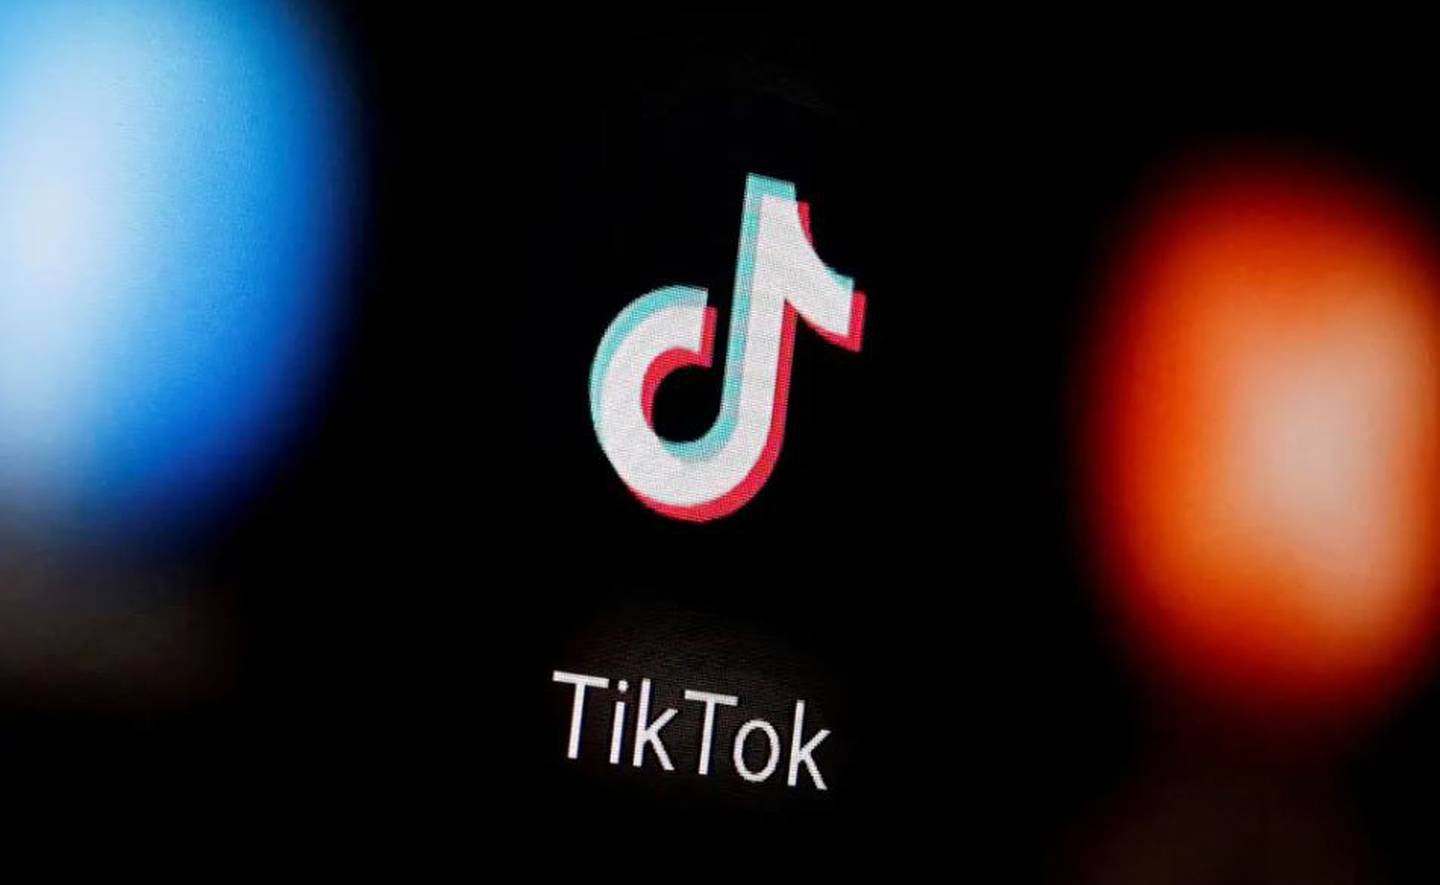 Puris alleged in the lawsuit that she was subjected to age- and sex-related discriminatory treatment by TikTok's parent company, ByteDance.  |  Photo: REUTERS